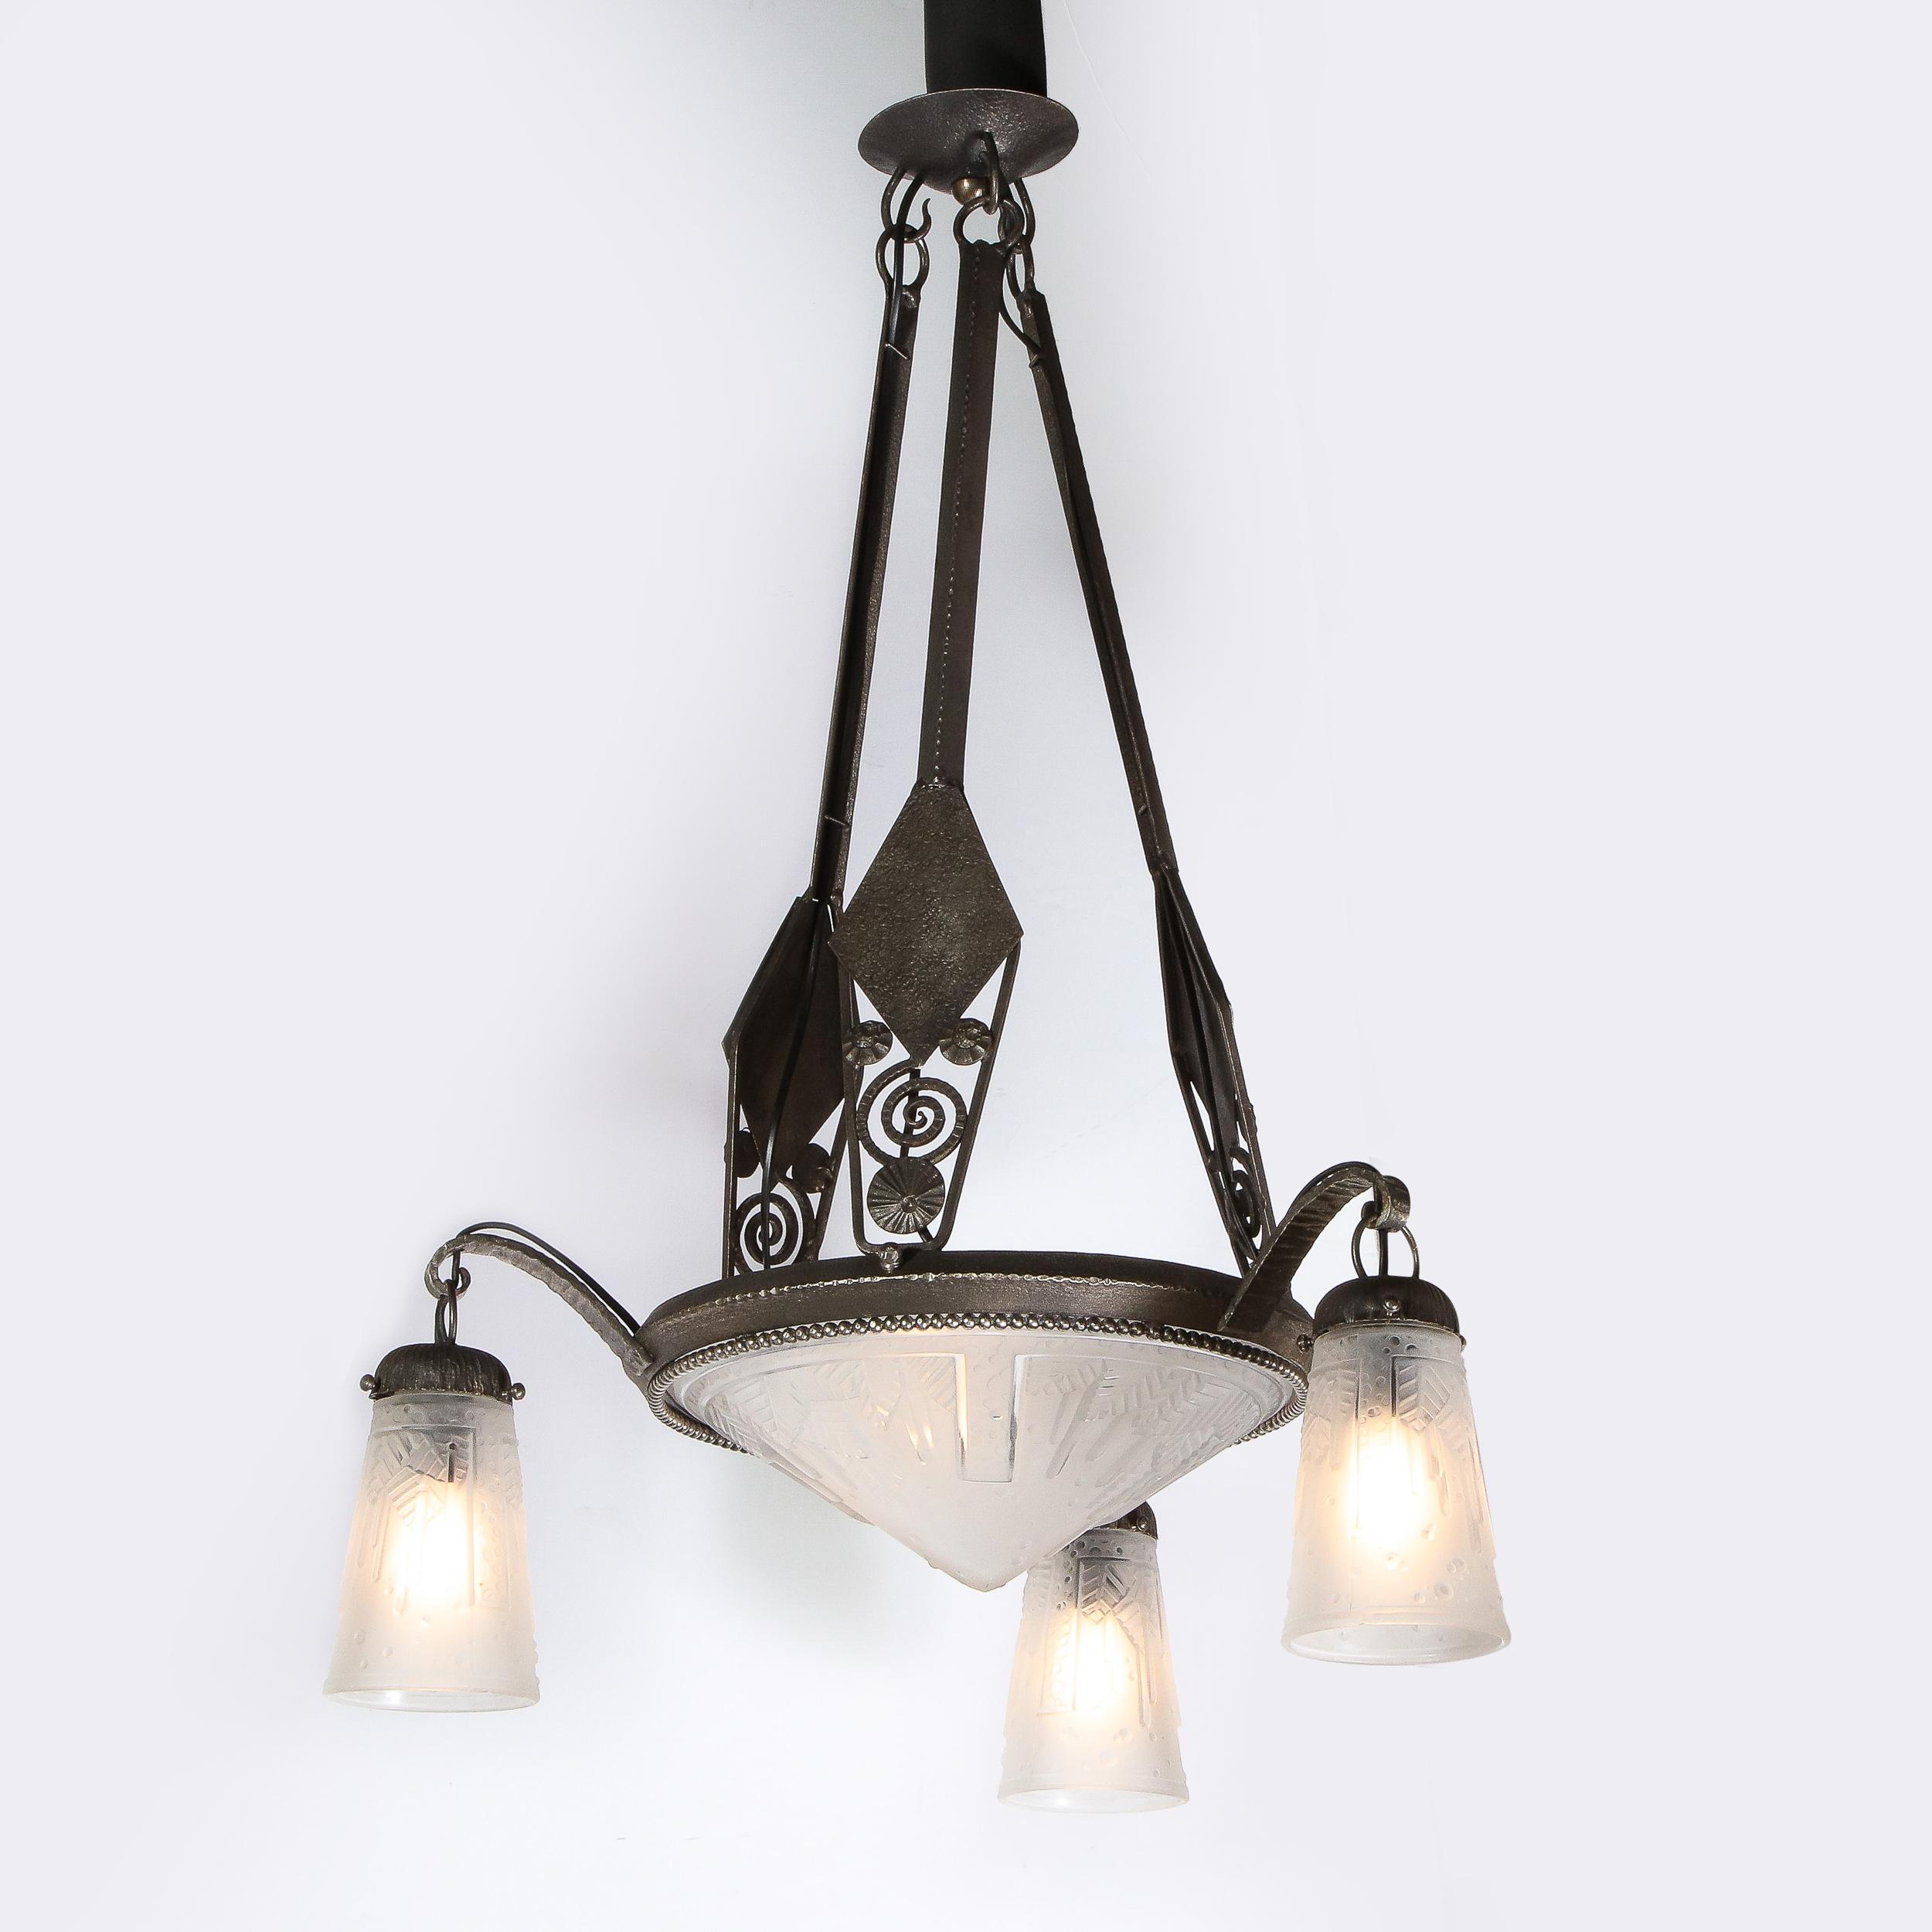 French Art Deco Cubist Wrought Iron & Frosted Glass Chandelier, Manner of Edgar Brandt For Sale